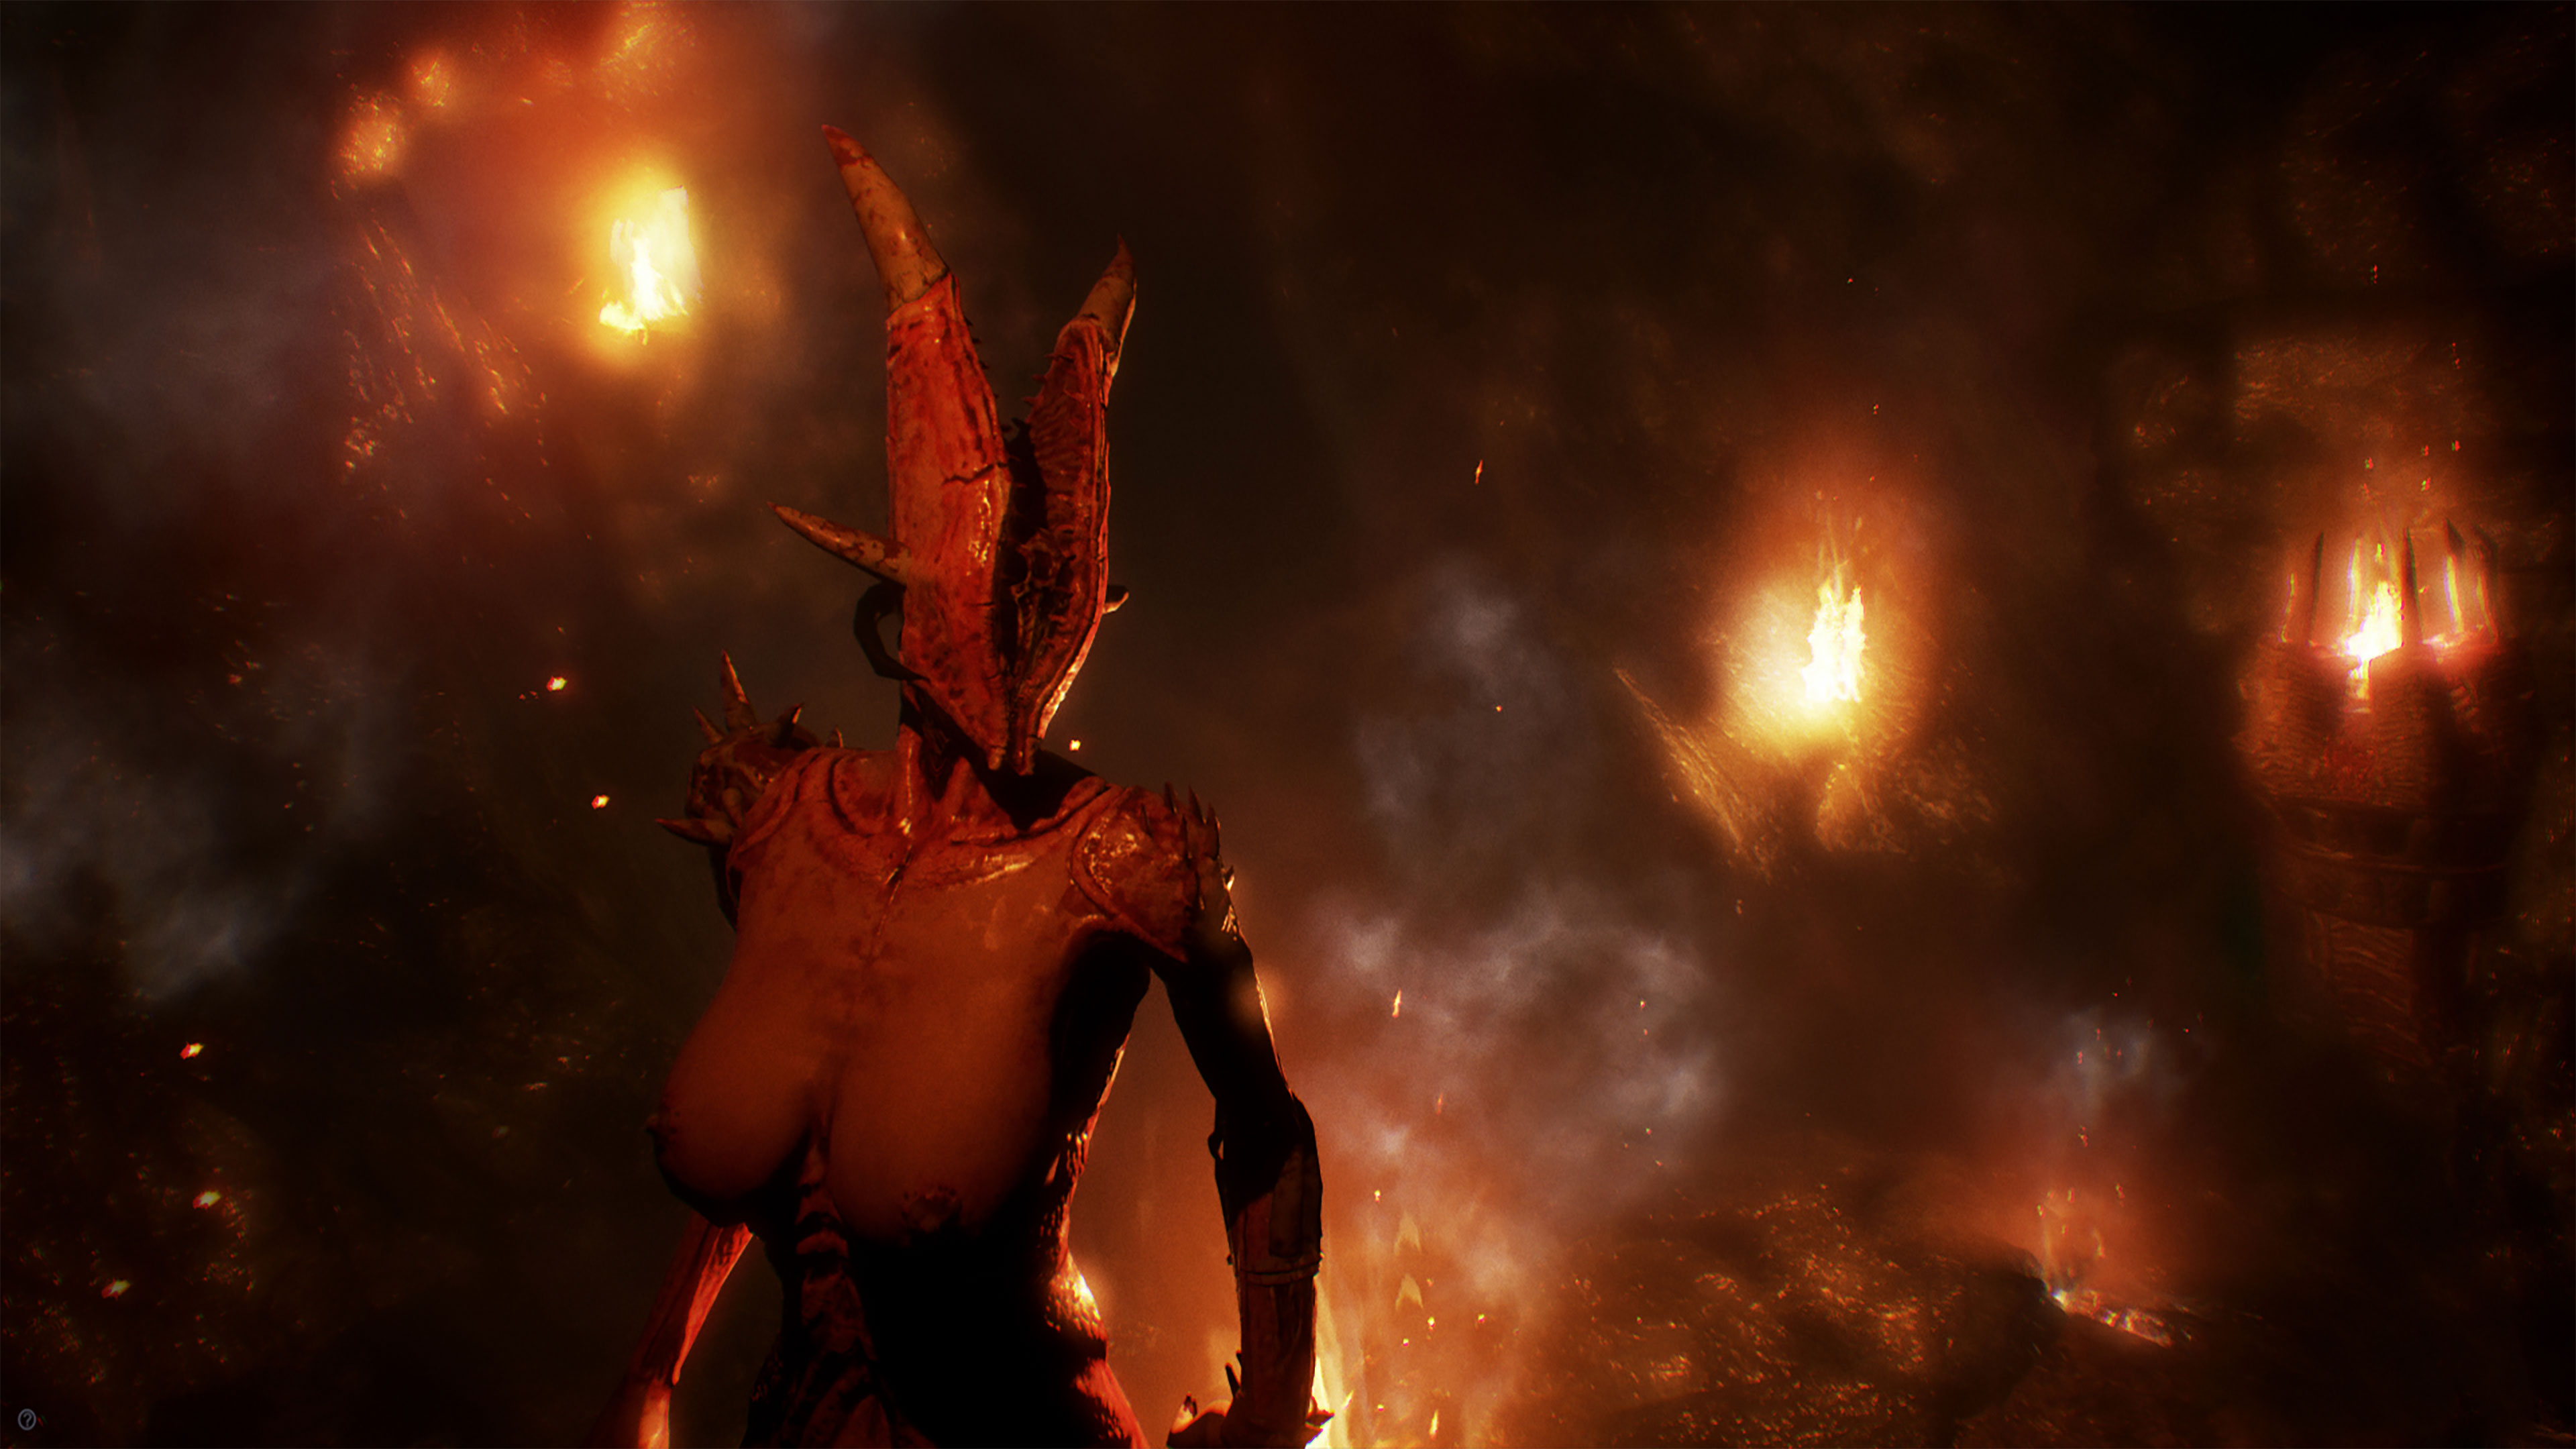 Agony Wallpapers Ultra Hd Gameranx Agony 2018 Game 5K Wallpapers. 